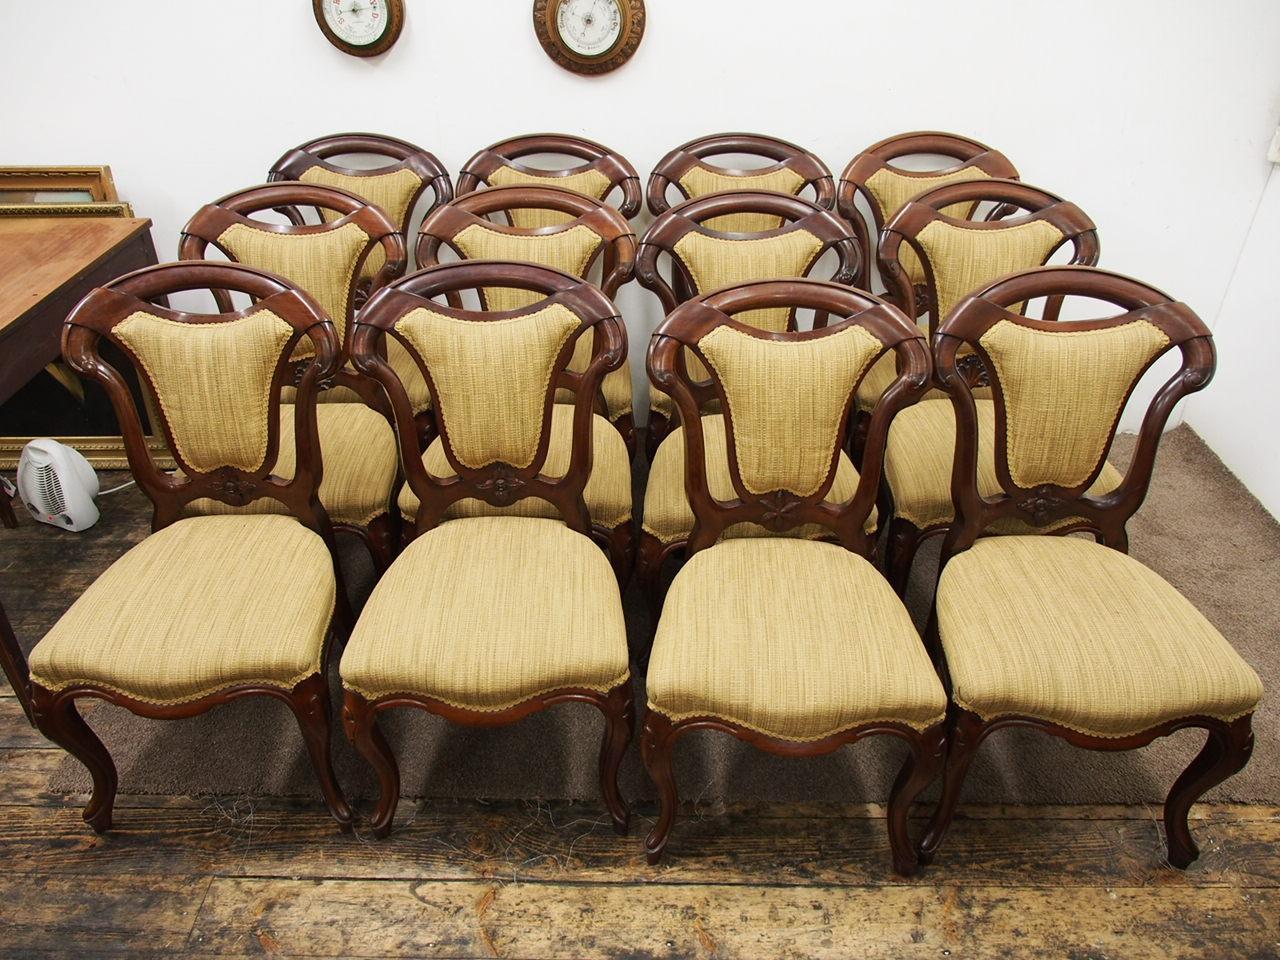 Set of 12 mahogany and upholstered Victorian dining chairs, circa 1870. The chairs have a curved top rail with a cartouche padded back and shaped uprights. At the base of the upholstered back is a carved leaf and the patterns vary from chair to